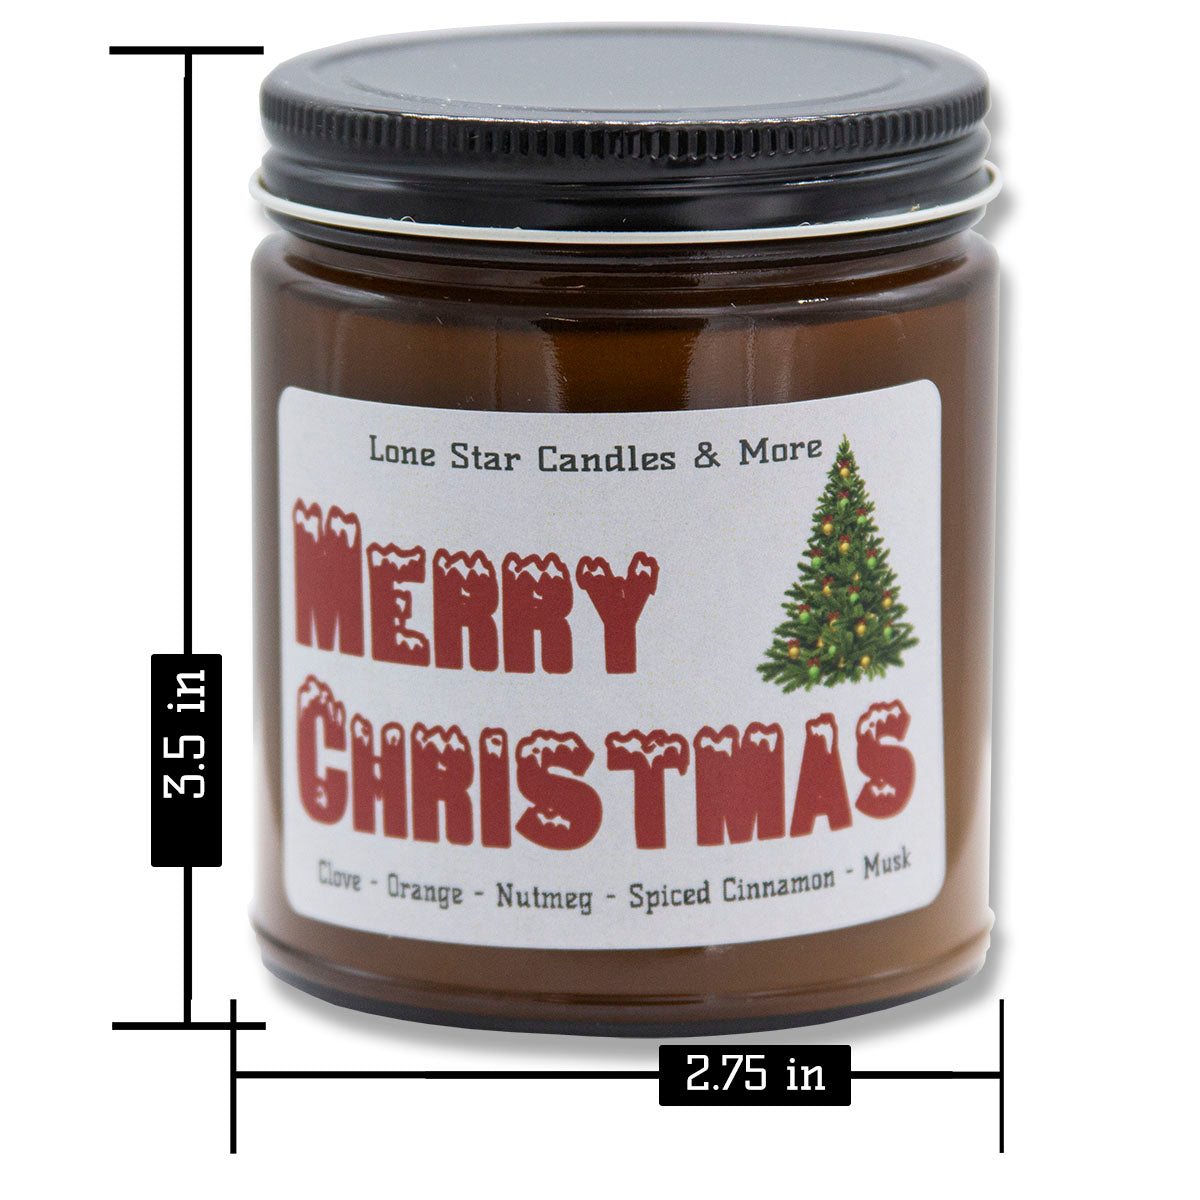 Autumn Cider, Lone Star Candles & More's Premium Hand Poured Strongly Scented Soy Wax Gift Candle, Fall Spices, Sweet Musk, & A Hint of Pineapple, US Made in Texas, Amber Glass Jar 9oz Merry Christmas